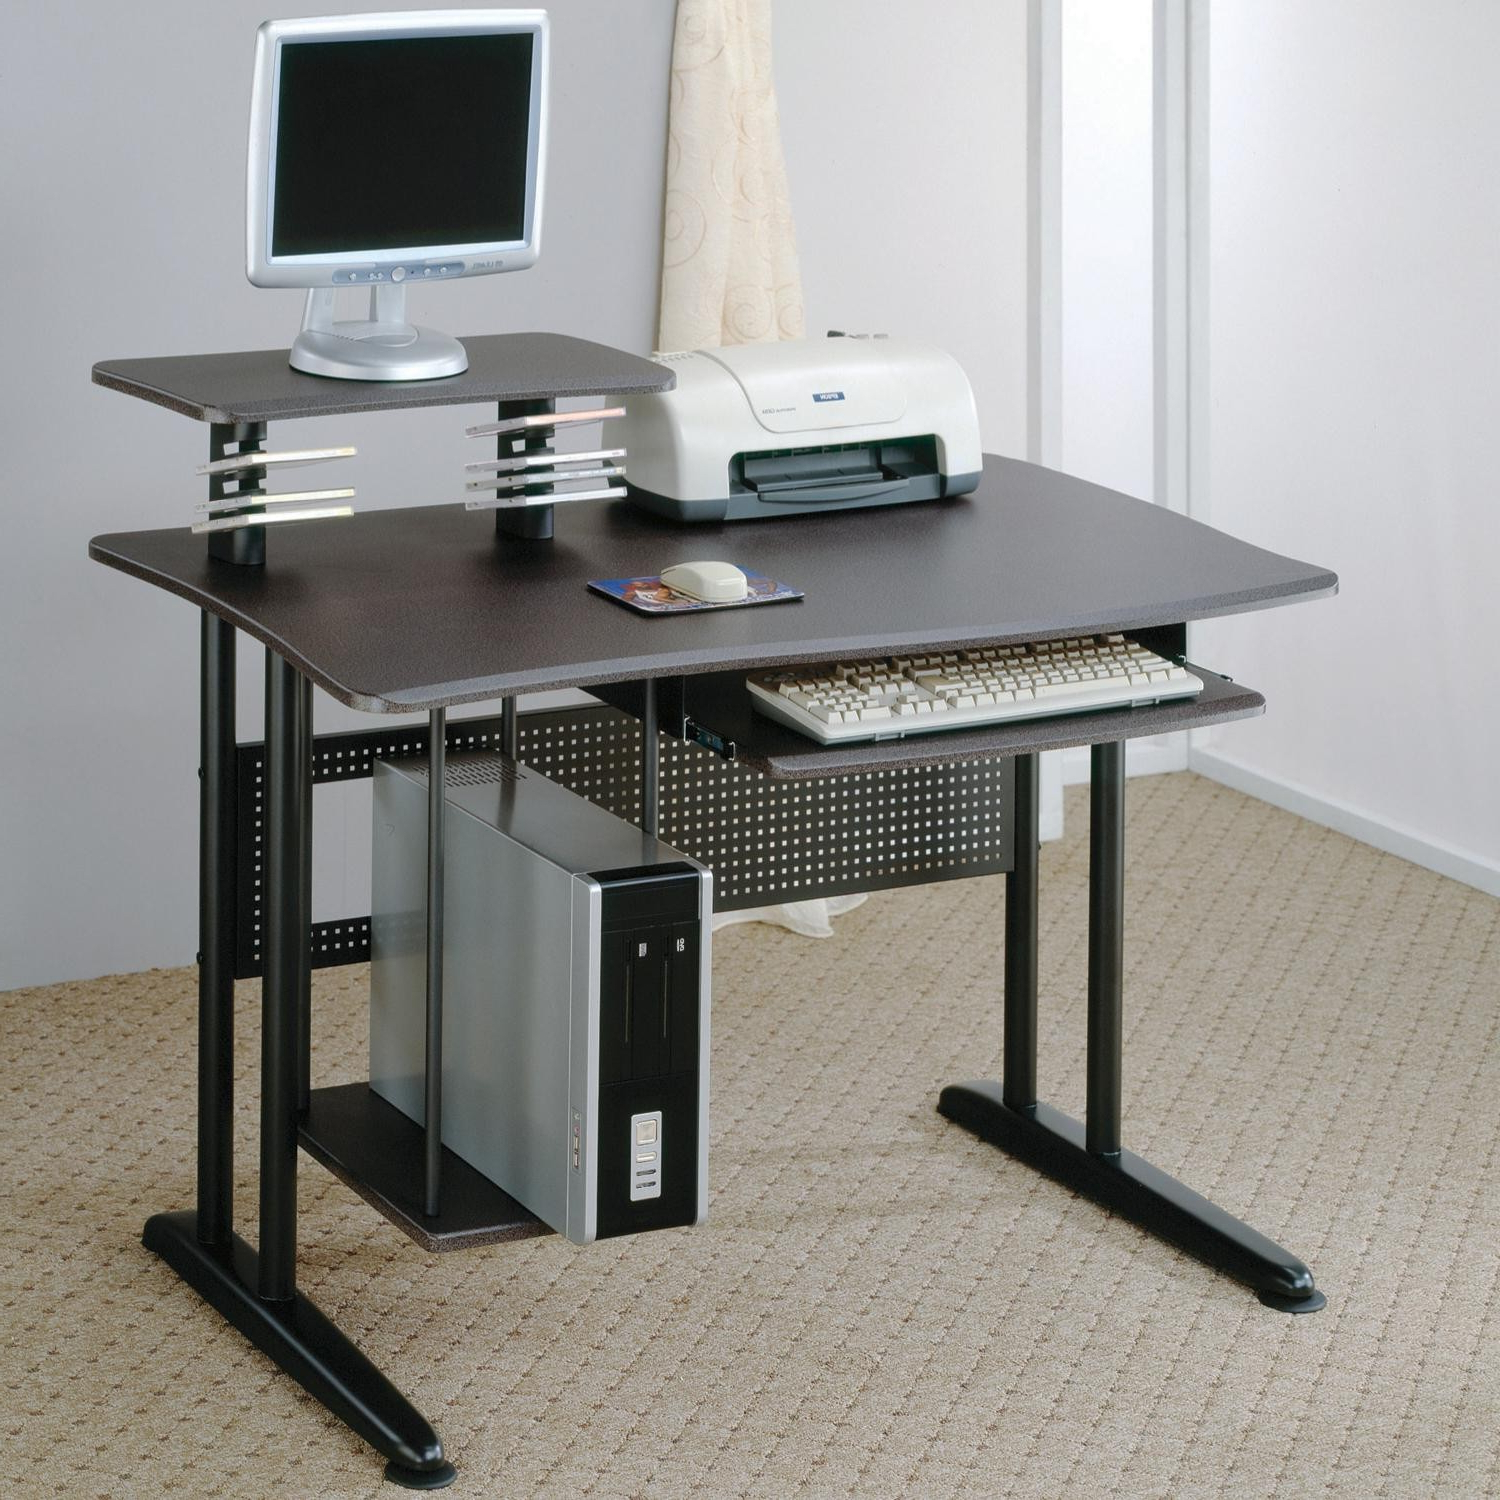 50 Computer Desk For Small Spaces, Small Desktop Computer Table